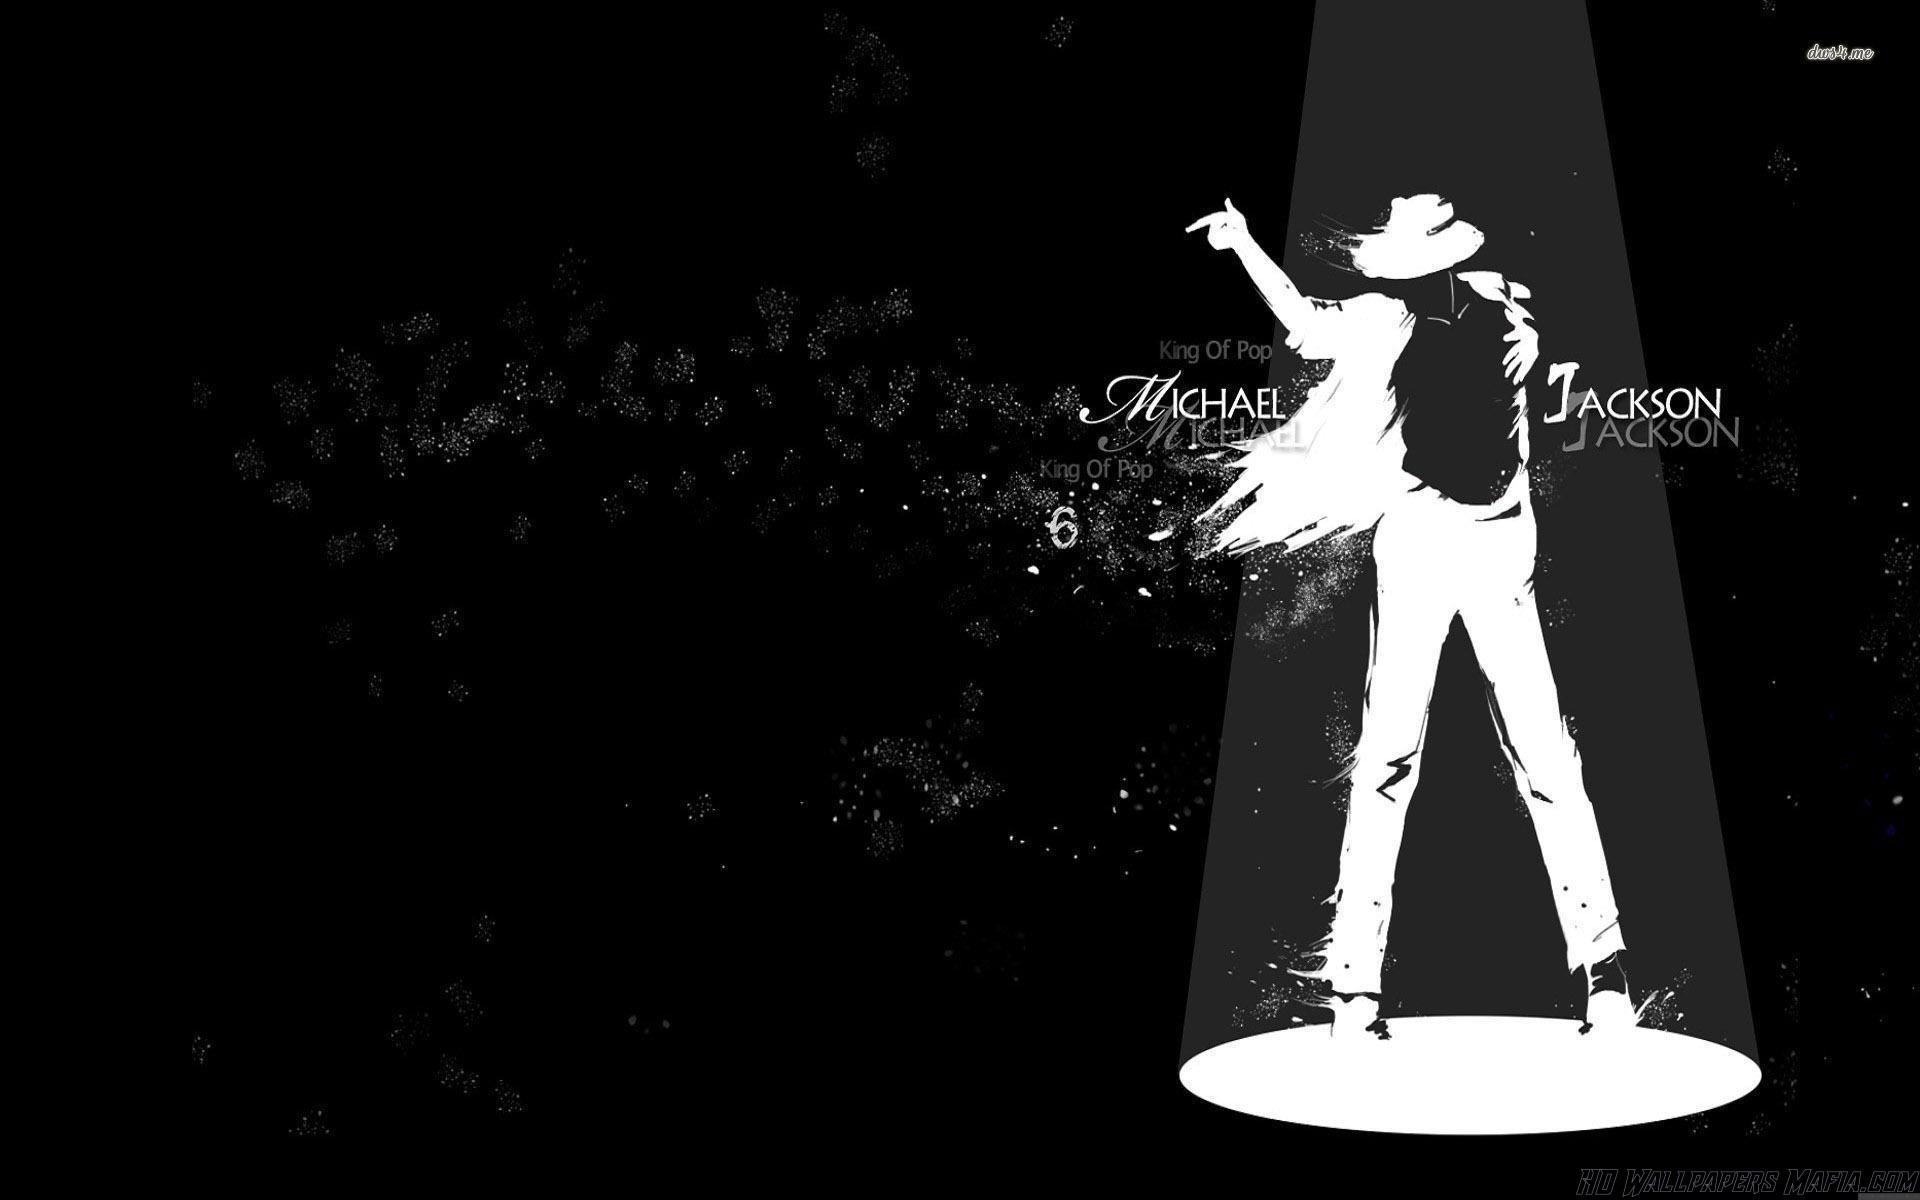 michael jackson wallpaper download,black,black and white,standing,darkness,font